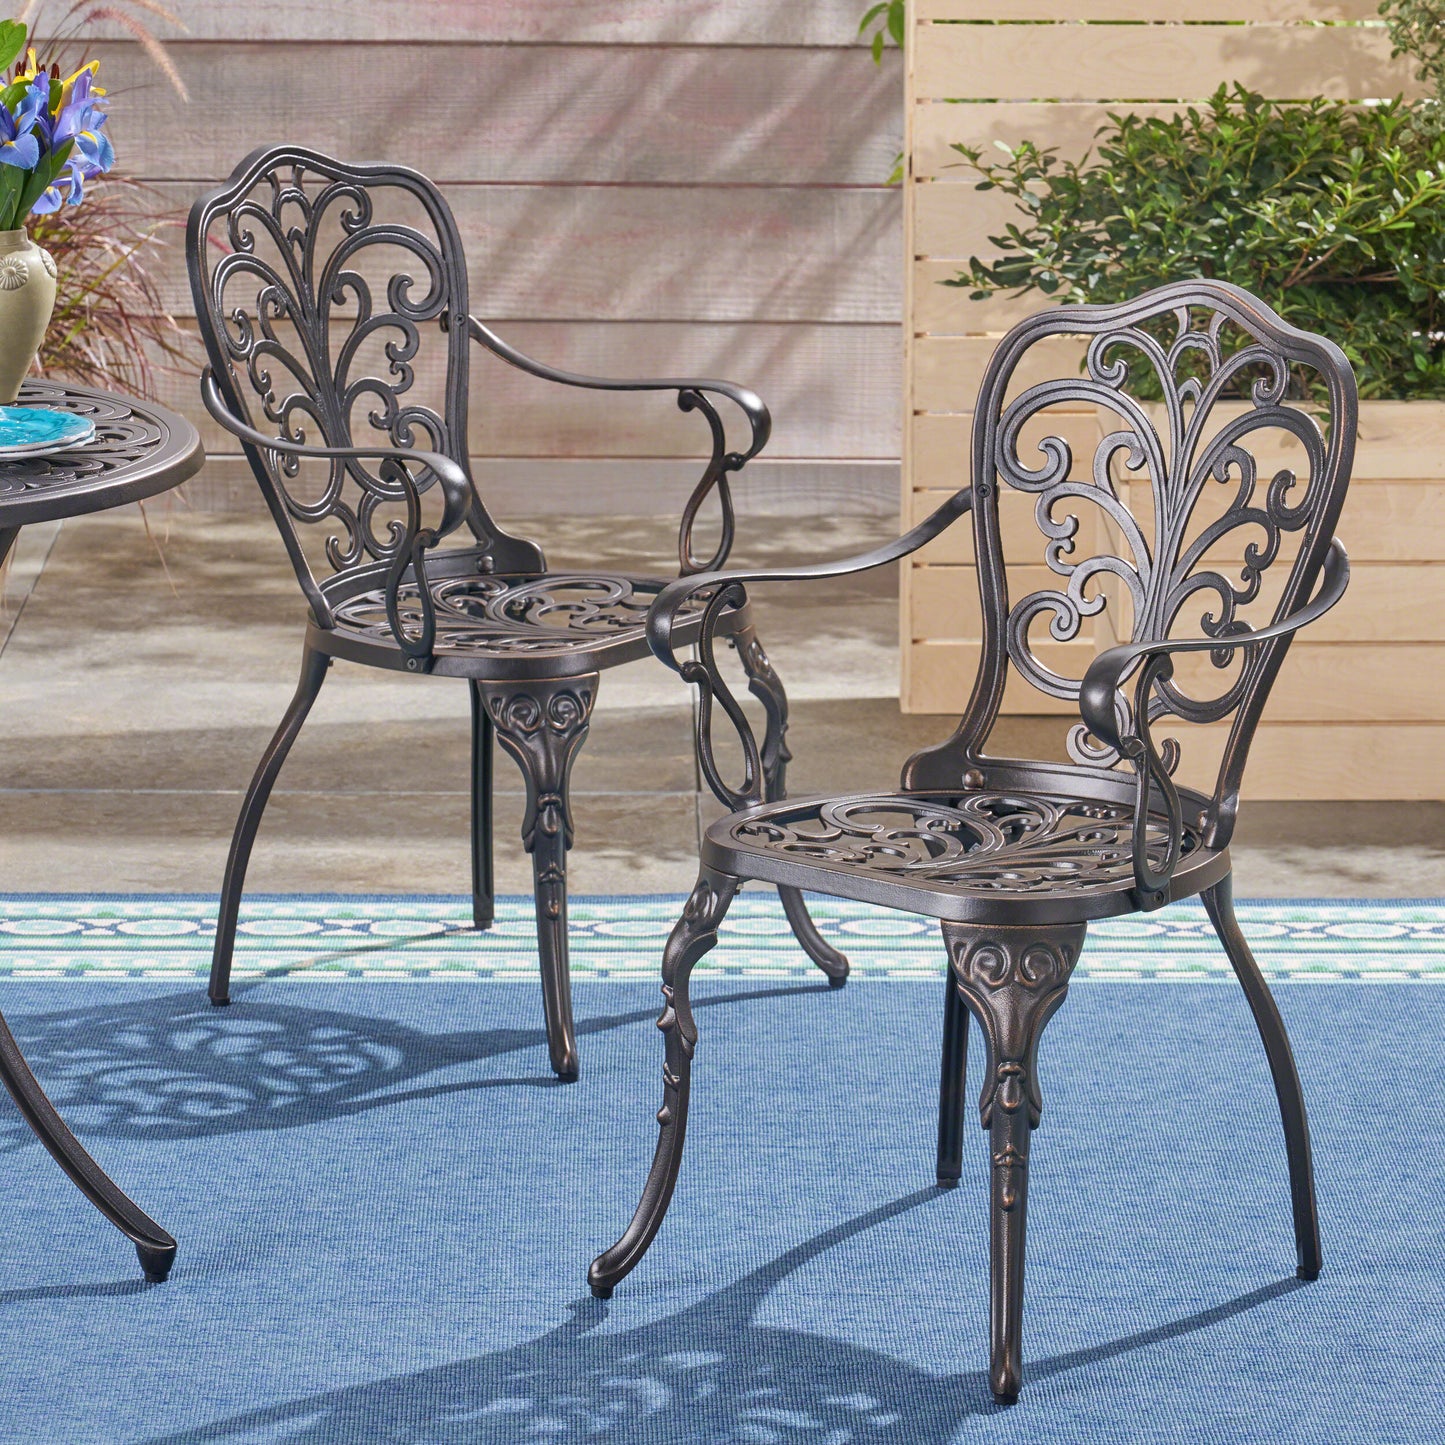 Buddy Outdoor Cast Aluminum Dining Chair (Set of 2), Shiny Copper